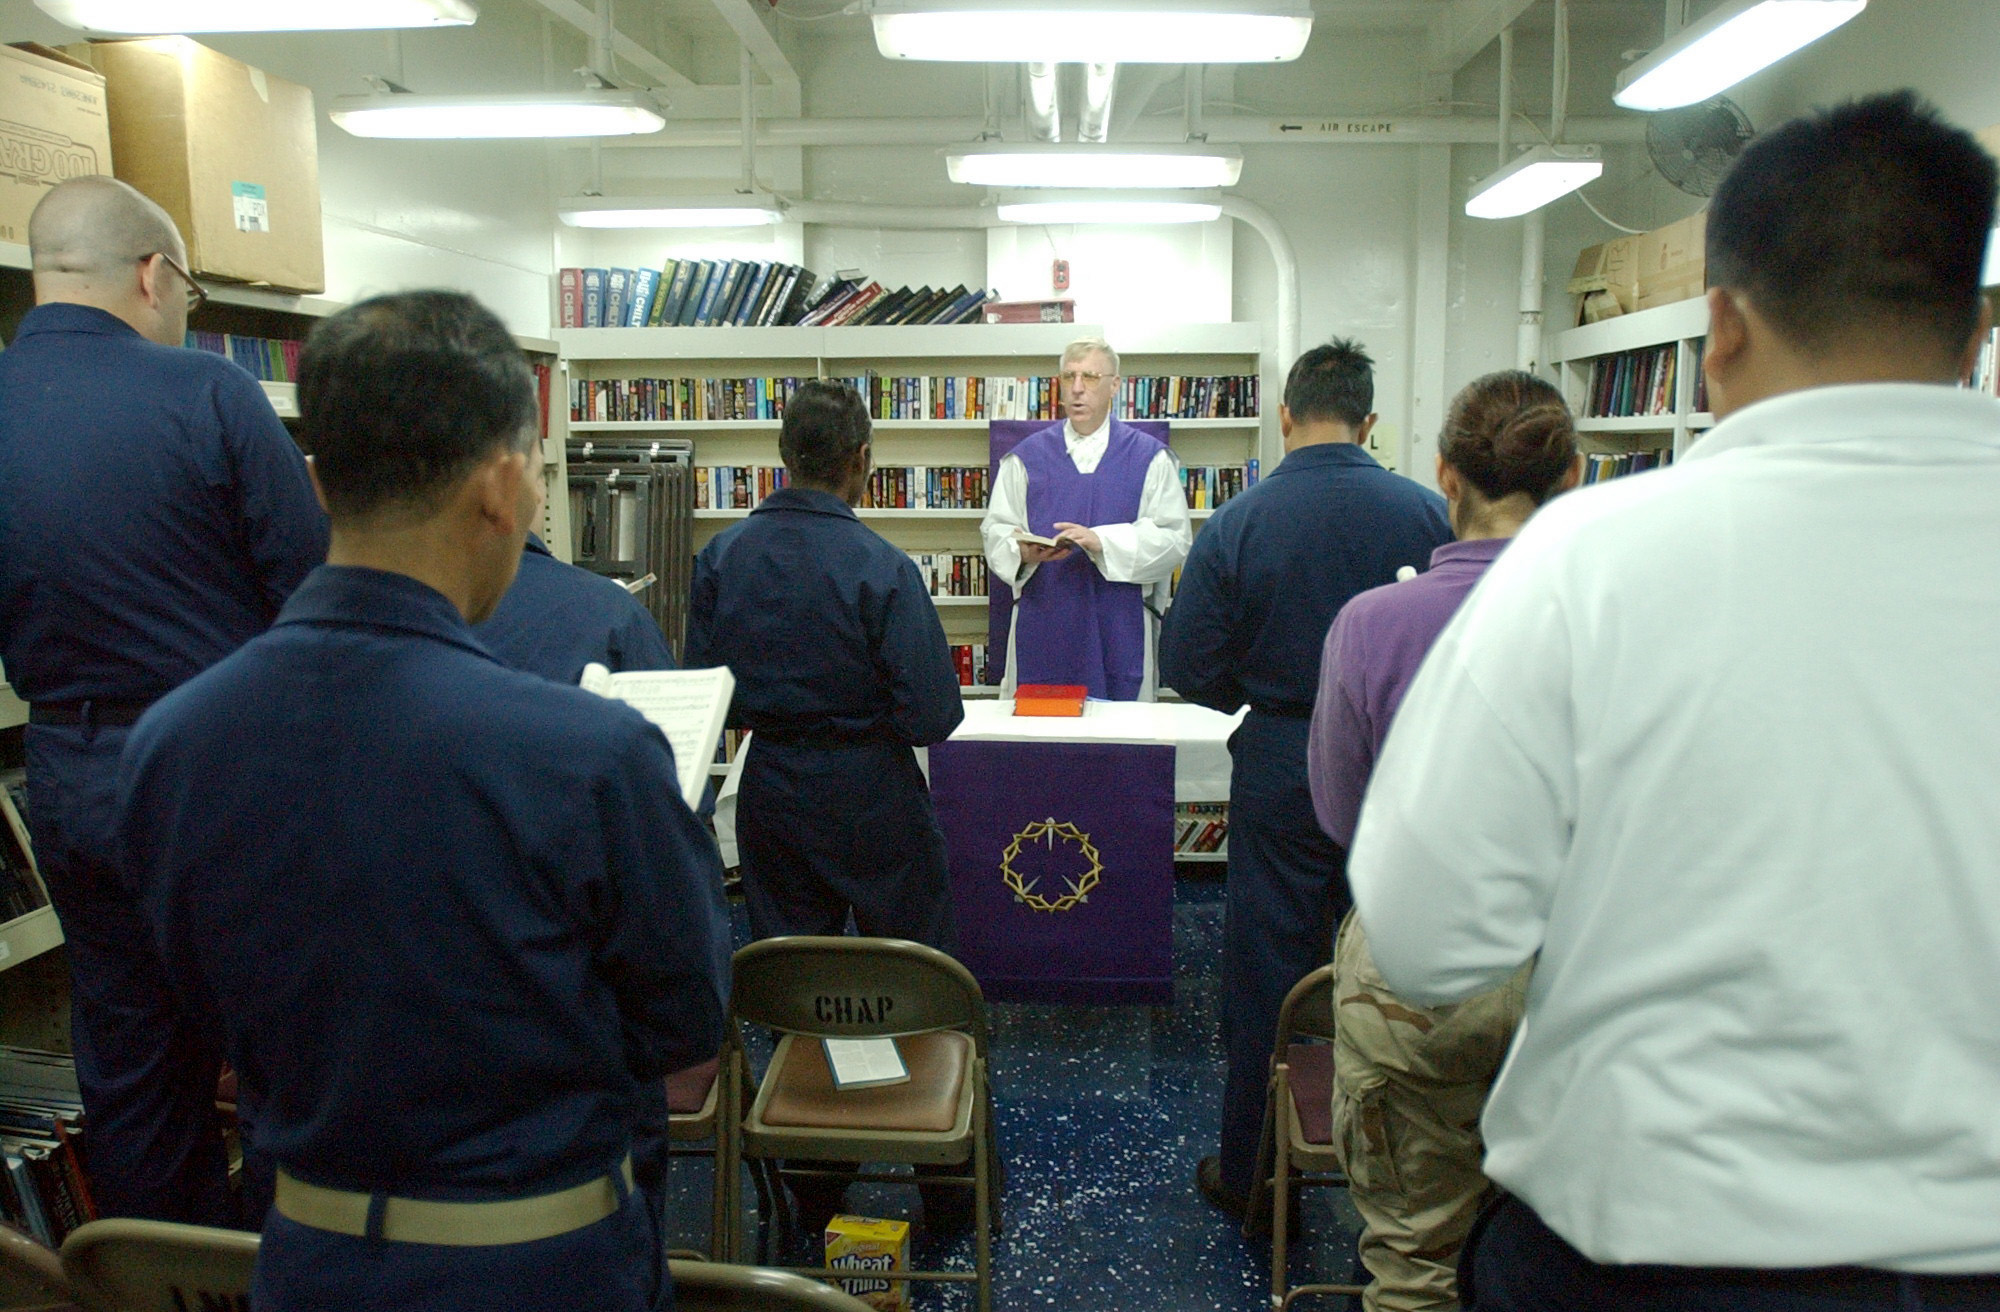 US Navy 030407-N-5555F-038 Cdr. Jerome Dillon, U.S. Navy chaplain from South Sioux City, Neb., conducts Roman Catholic Mass aboard the fast combat support ship USS Sacramento (AOE 1